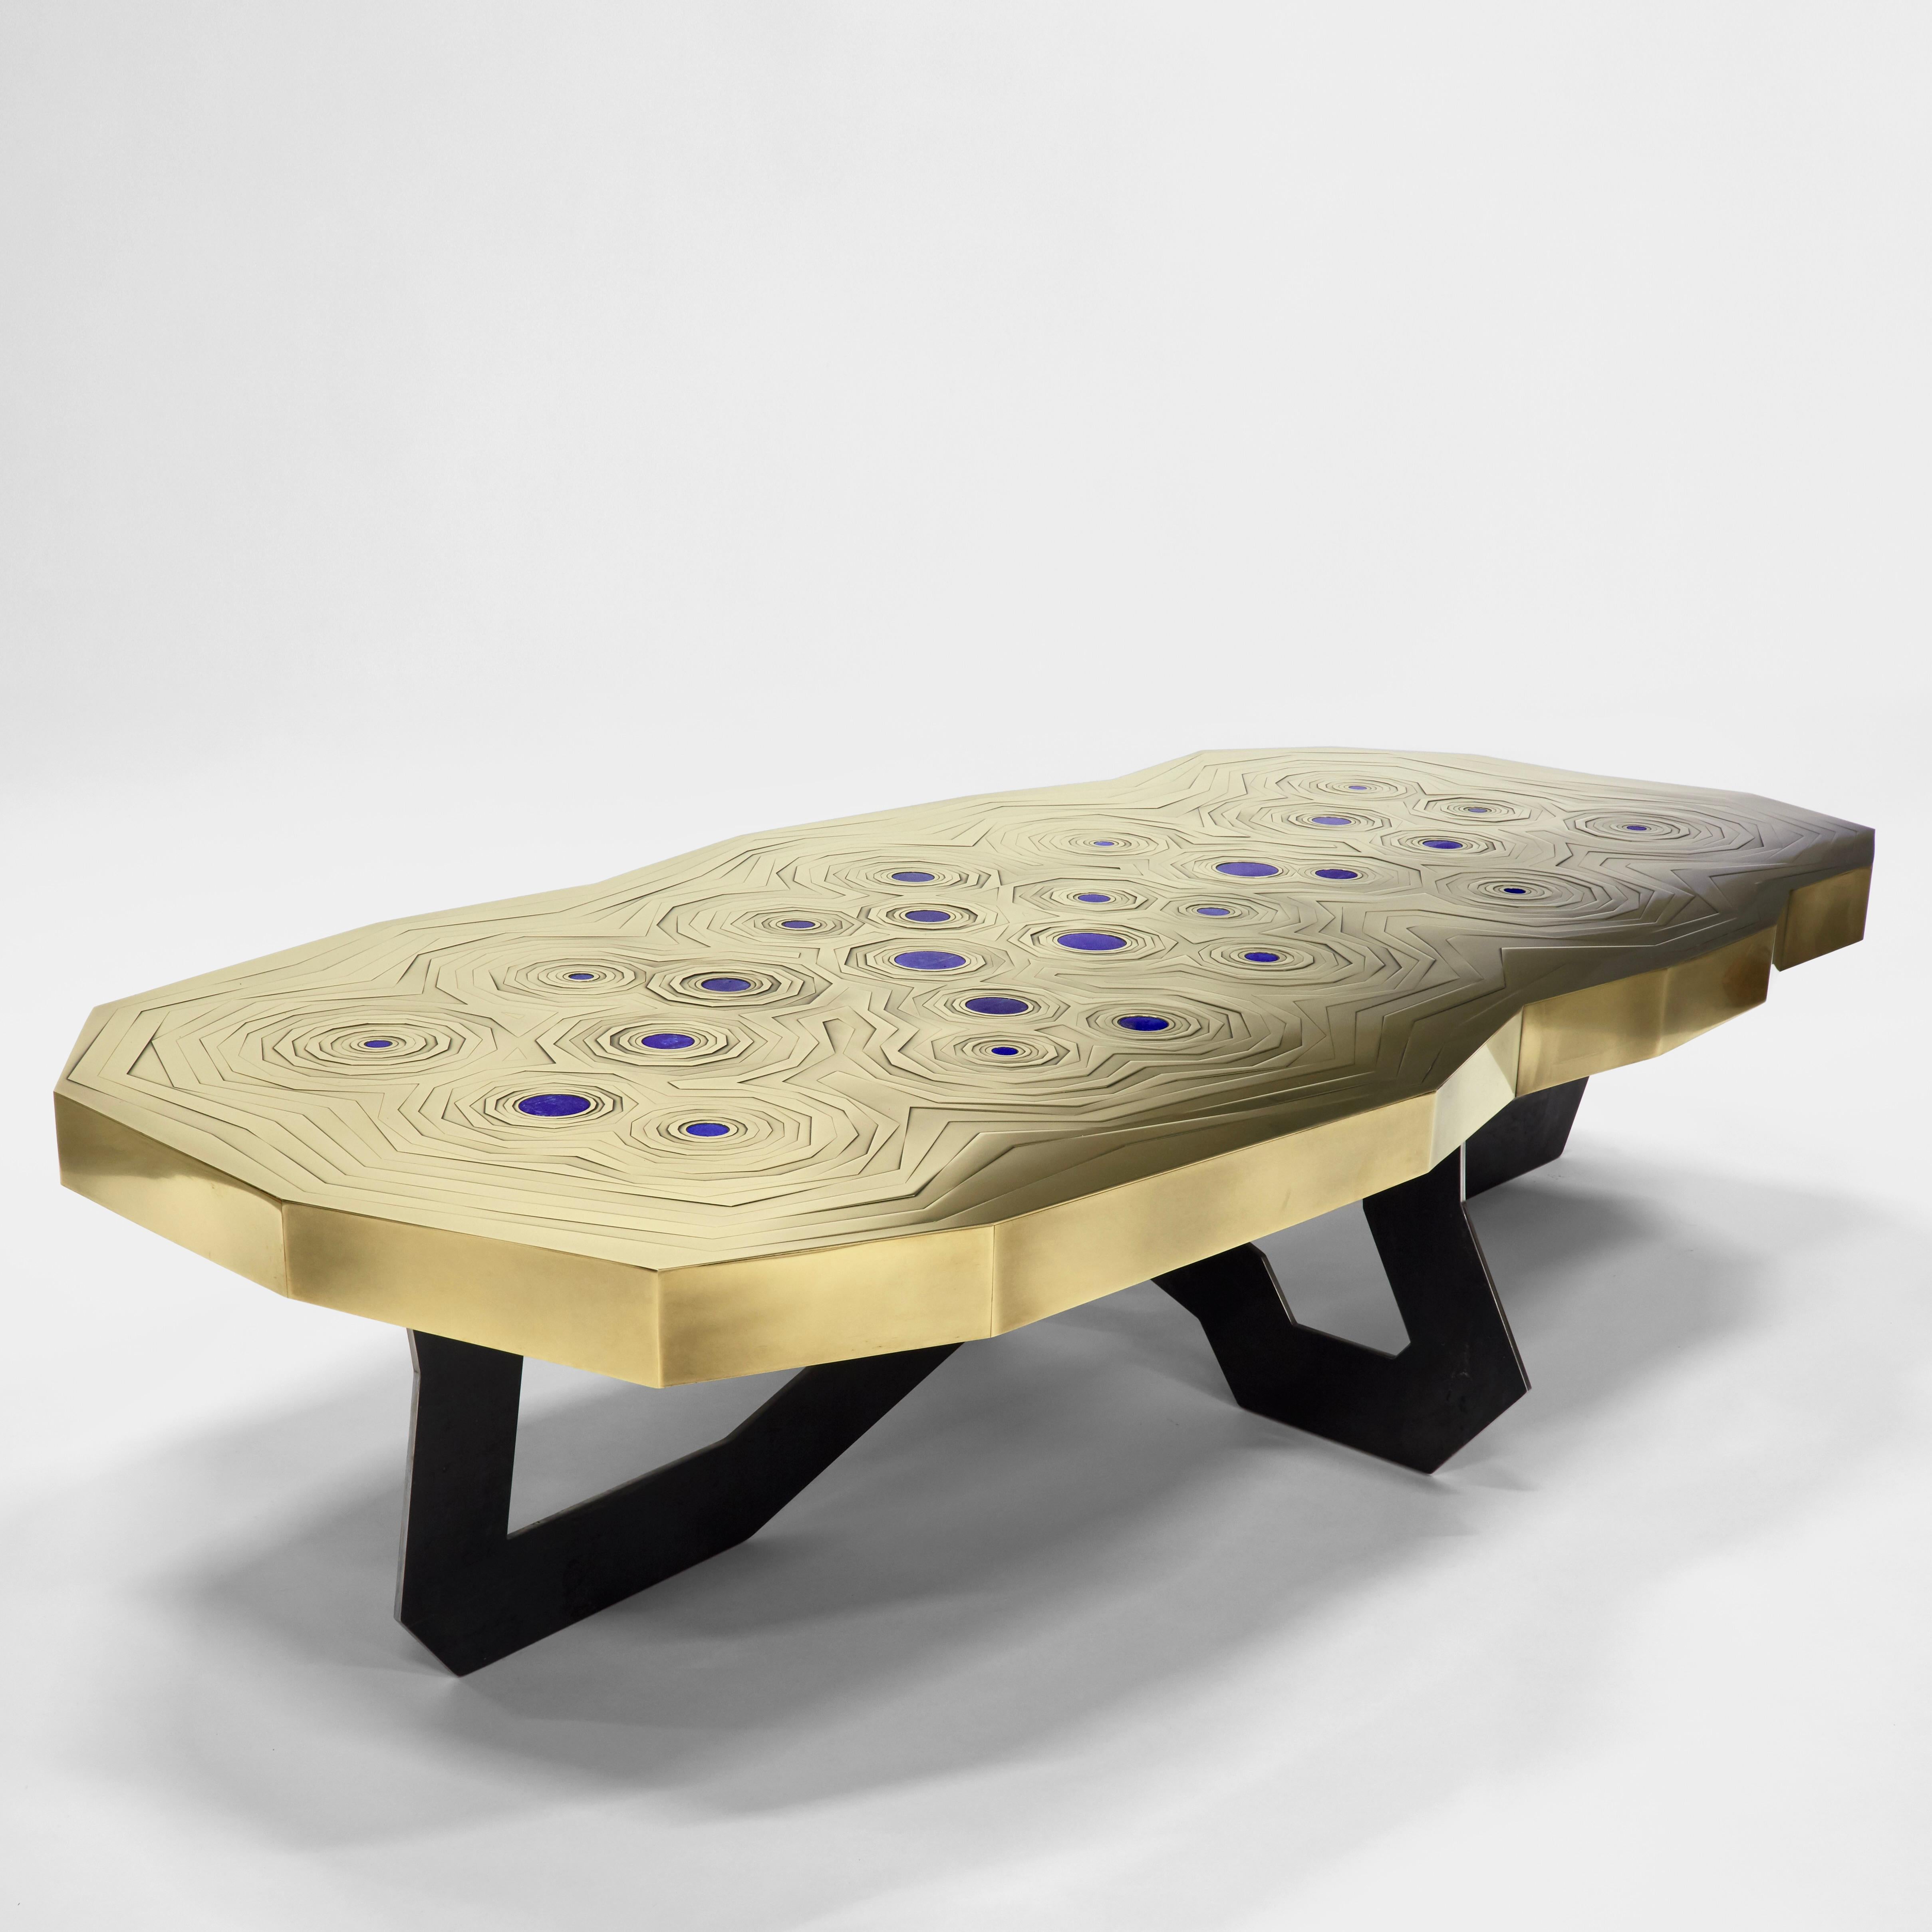 This brass mosaic top with 26 mounted lapis lazuli stones & black steel basement coffee table by Erwan Boulloud is a true masterpiece giving light and energy to an entire environment.
Signed piece on the bottom.

Graduated from the Ecole Boulle